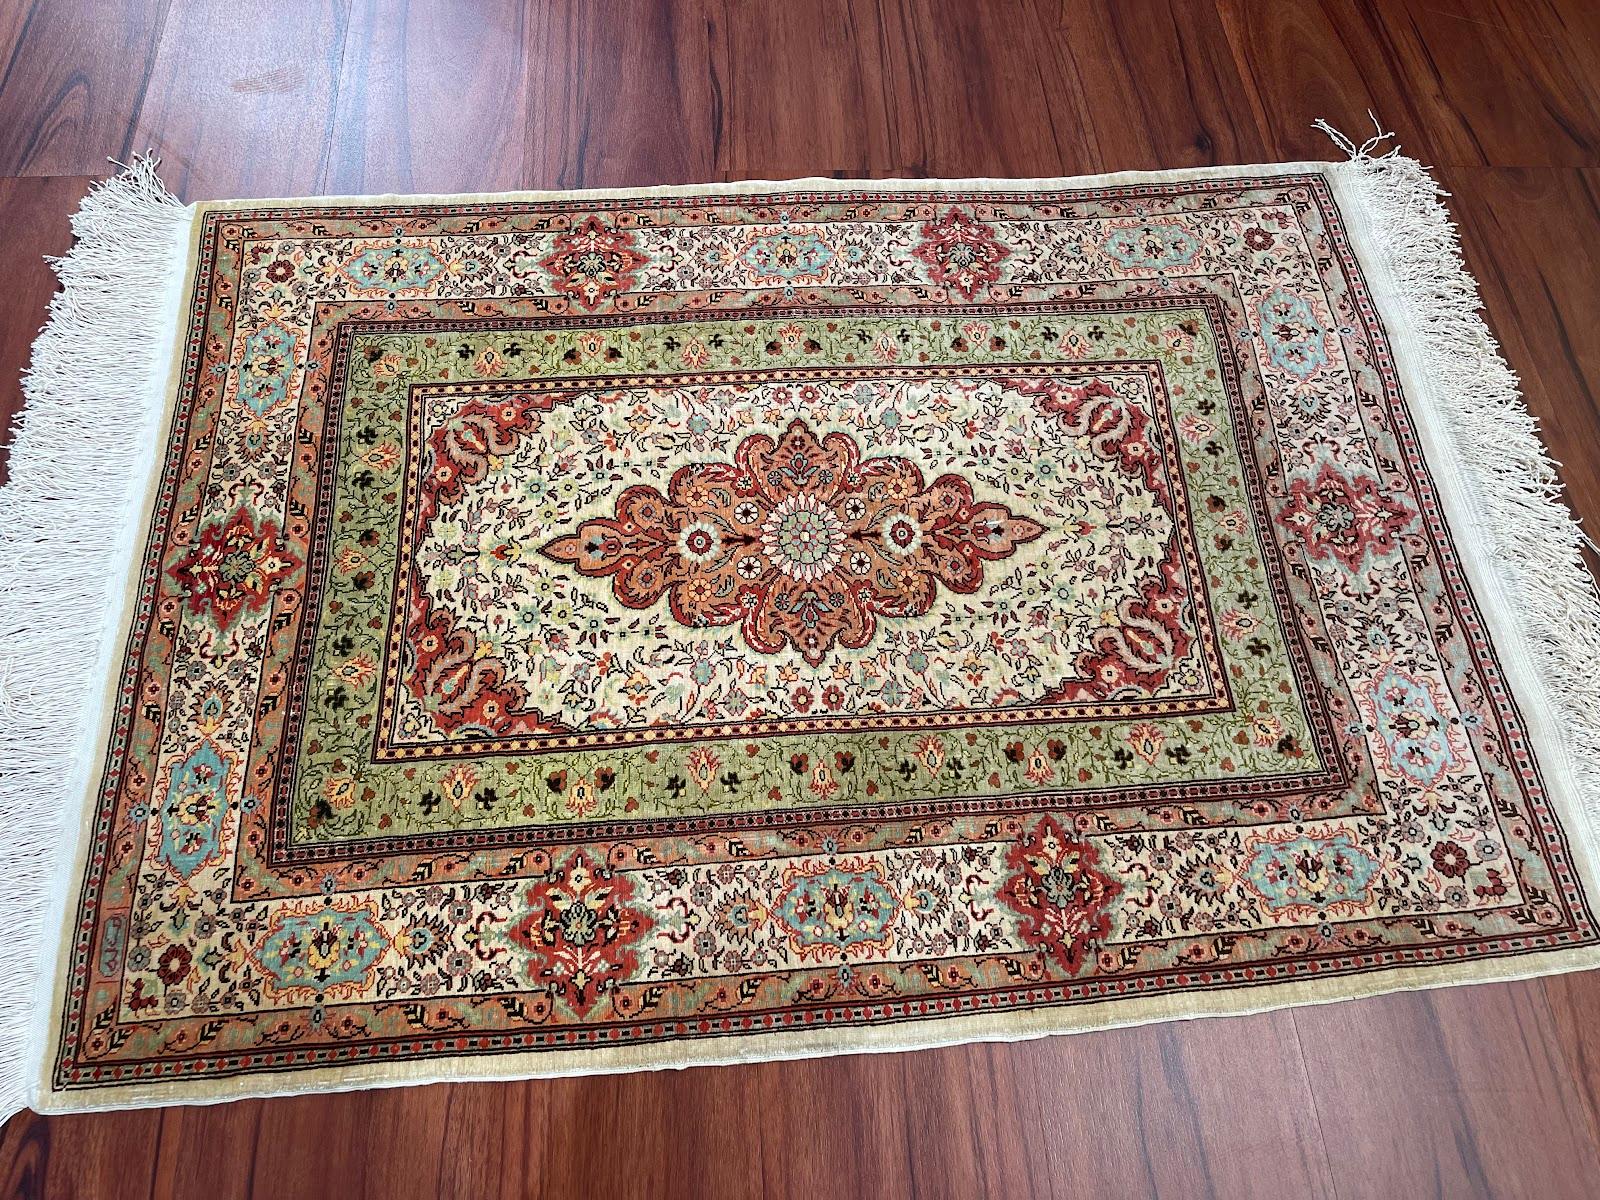 This is a Turkish Silk rug originated from Turkey. The Material is 100% silk. The Dimensions are 2’0”X 3’0” ft. Condition of the item is Purely Excellent. Circa (Date of manufacture) 20th century.

 